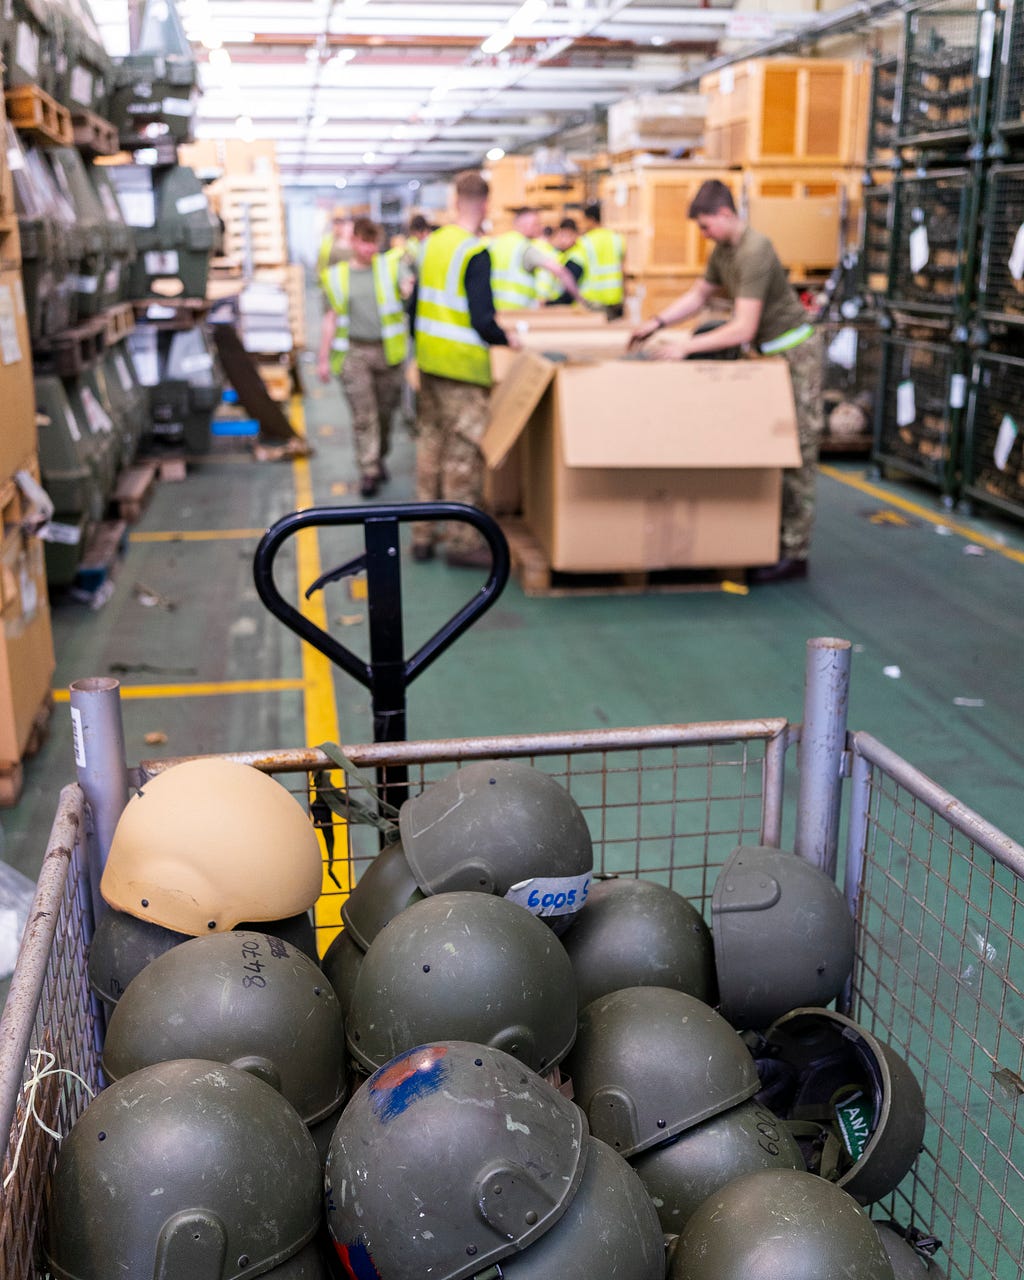 Close up of British Army helmets inside a metal crate